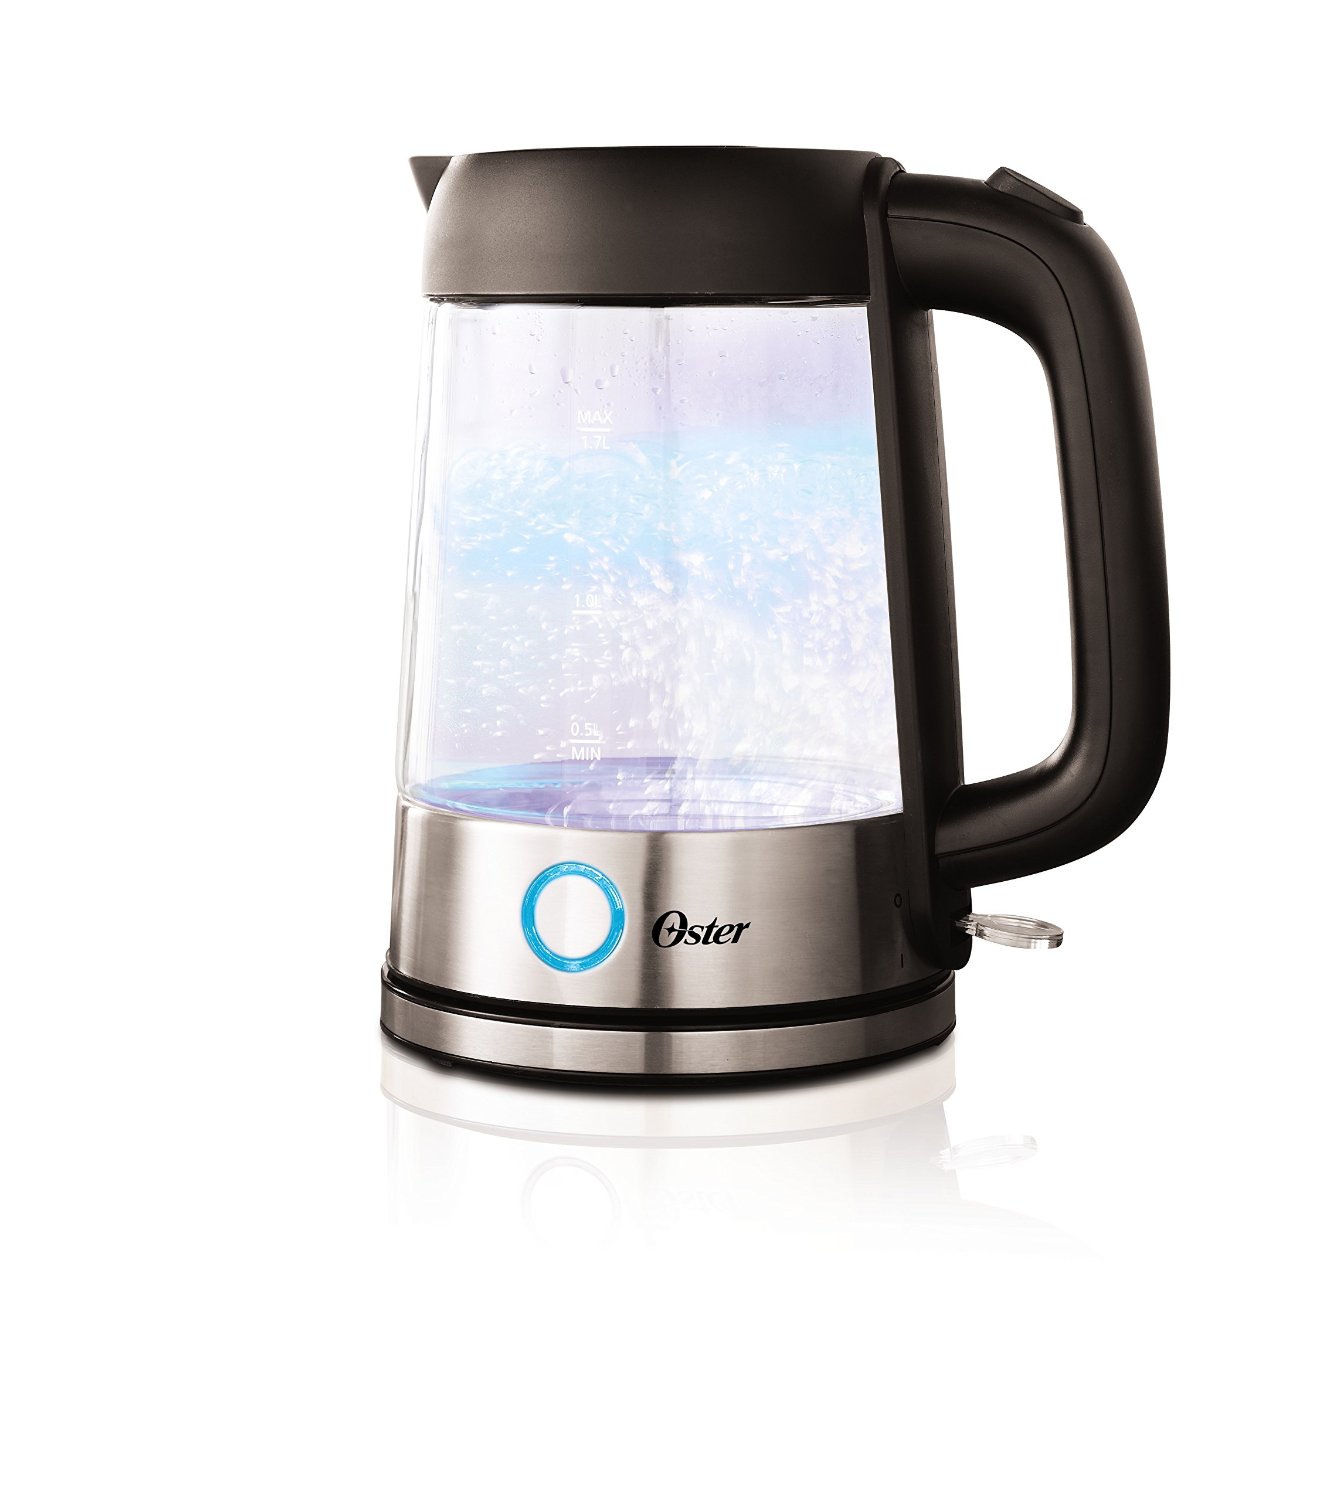 Oster glass kettle review